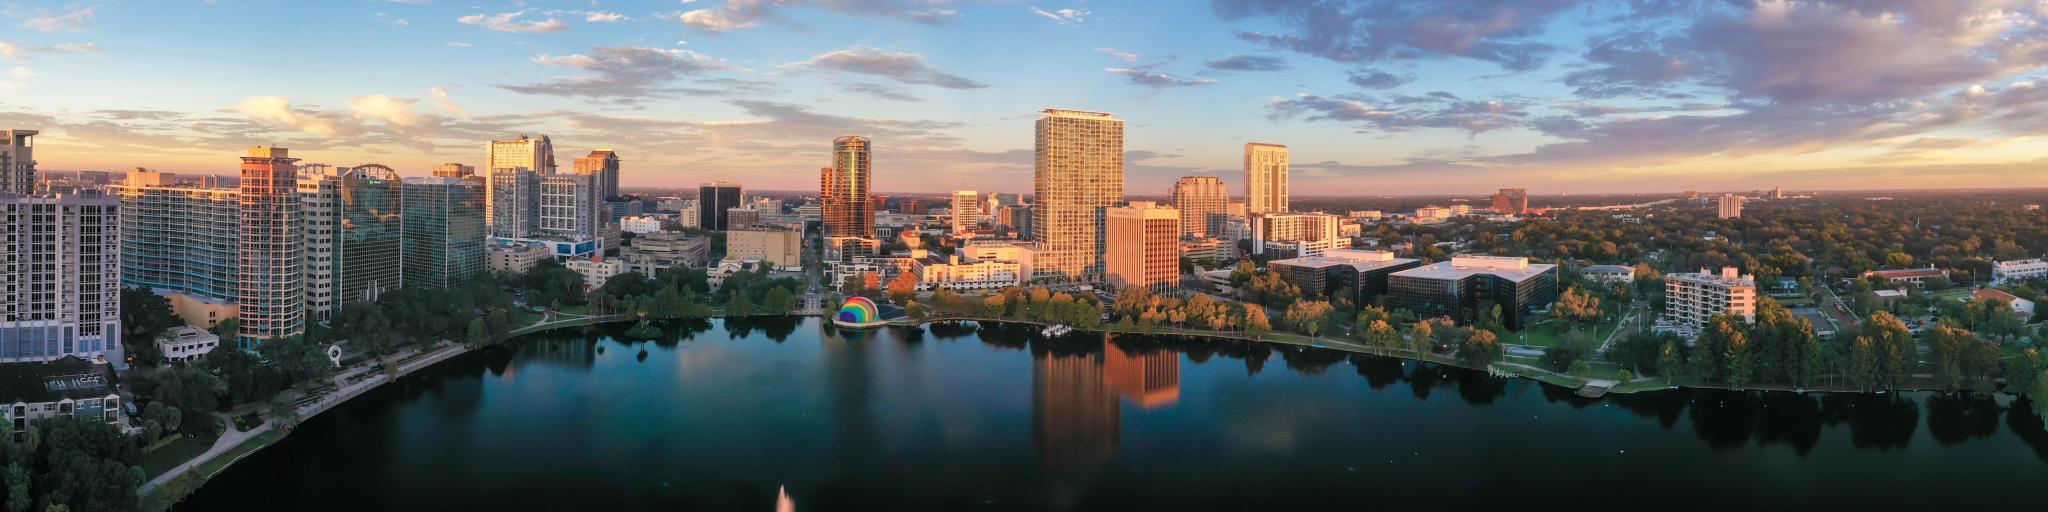 Orlando, Florida, USA taken from a drone shot at sunrise showing downtown Orlando.